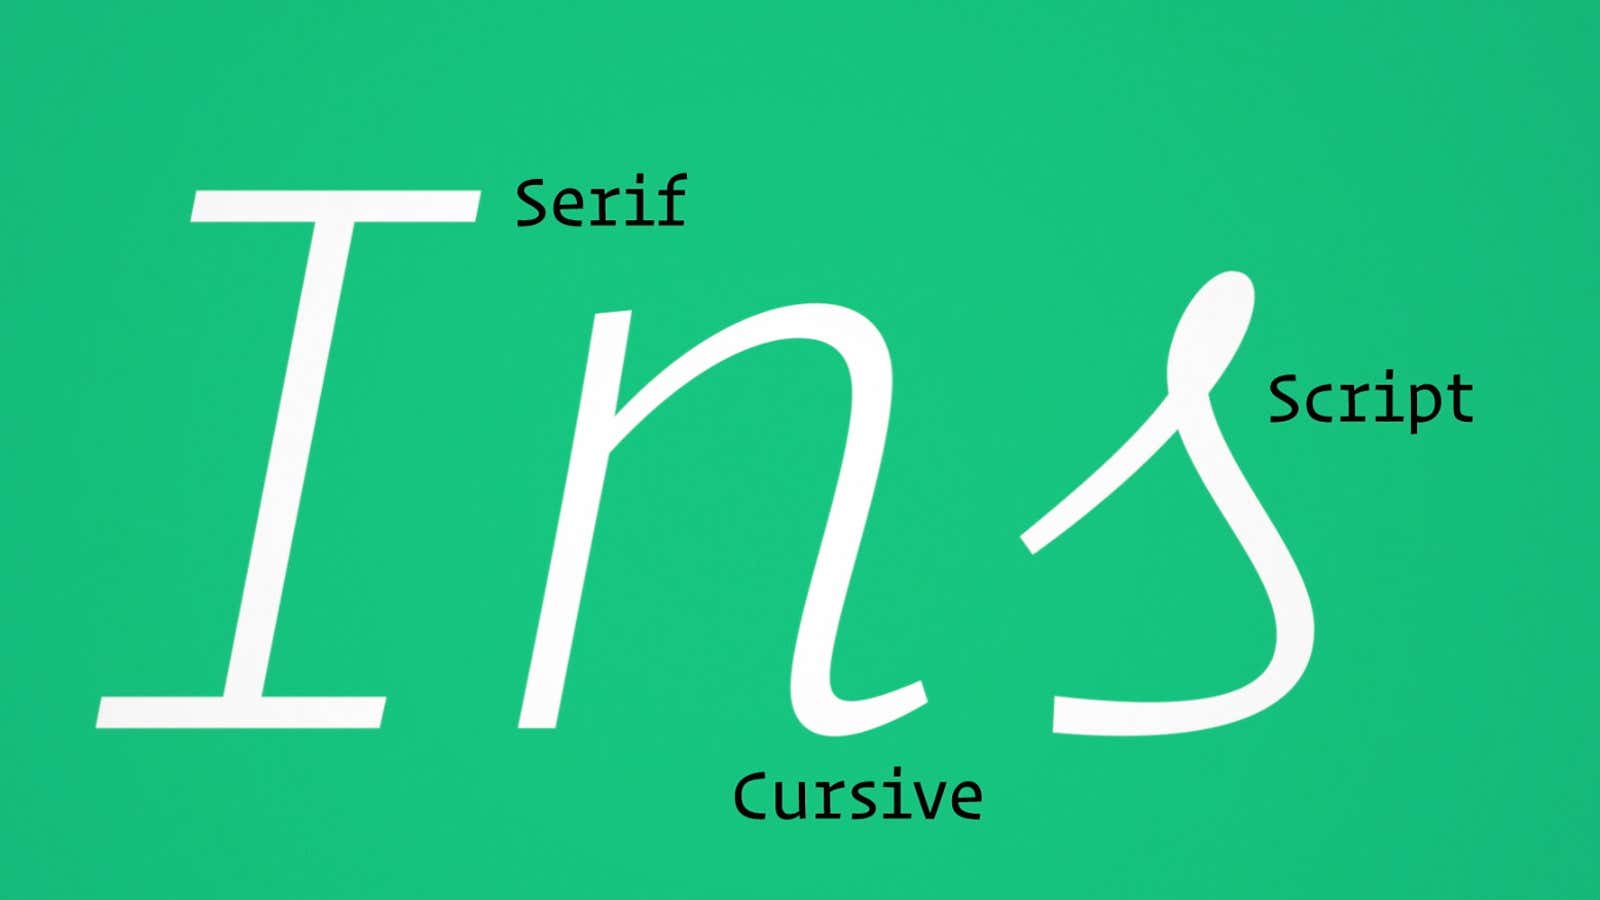 Video: The making of a brand-new font, from a renowned typeface designer